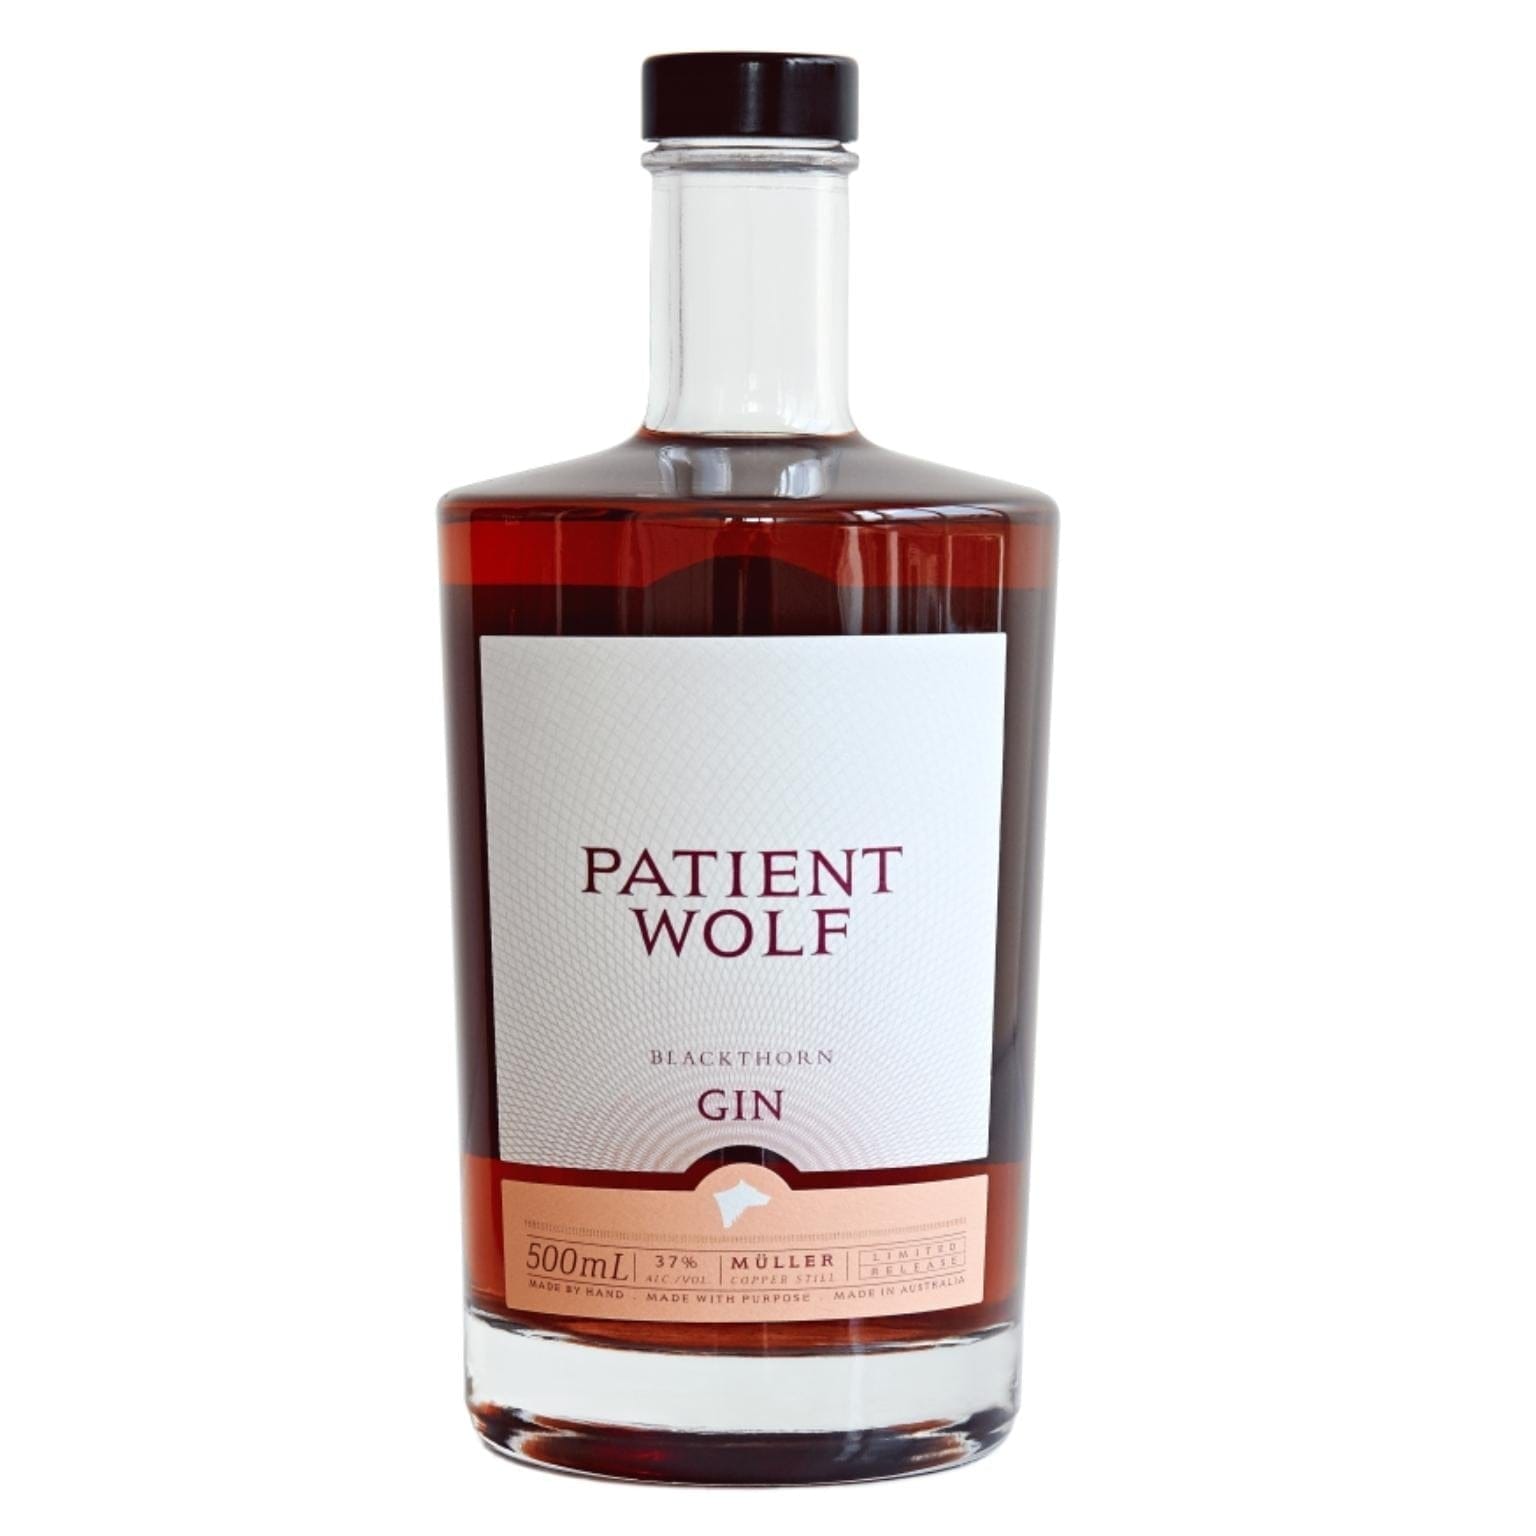 PERSONALISED PATIENT WOLF BLACKTHORN GIN 37% 500ML